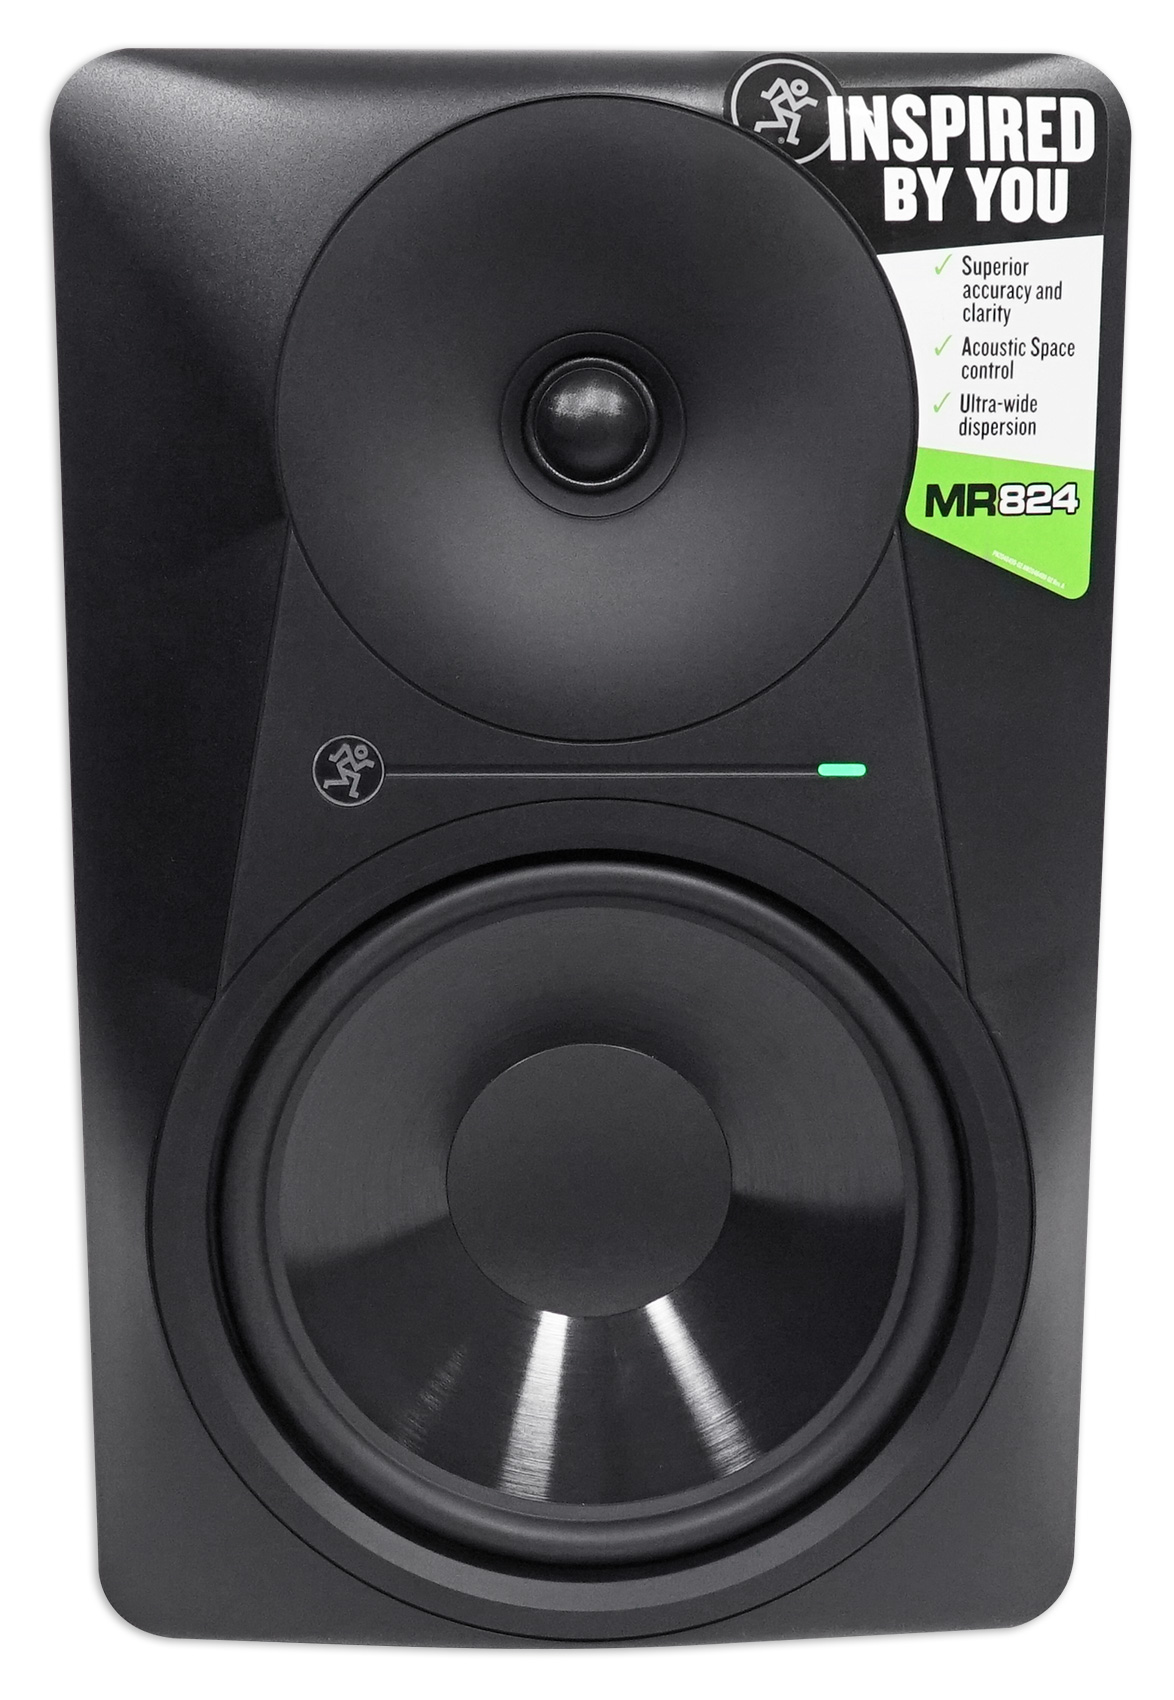 2 Mackie MR824 8” Powered Studio Monitors+10" Active Sub+Mic+Mount+Stands+Pads - image 2 of 10